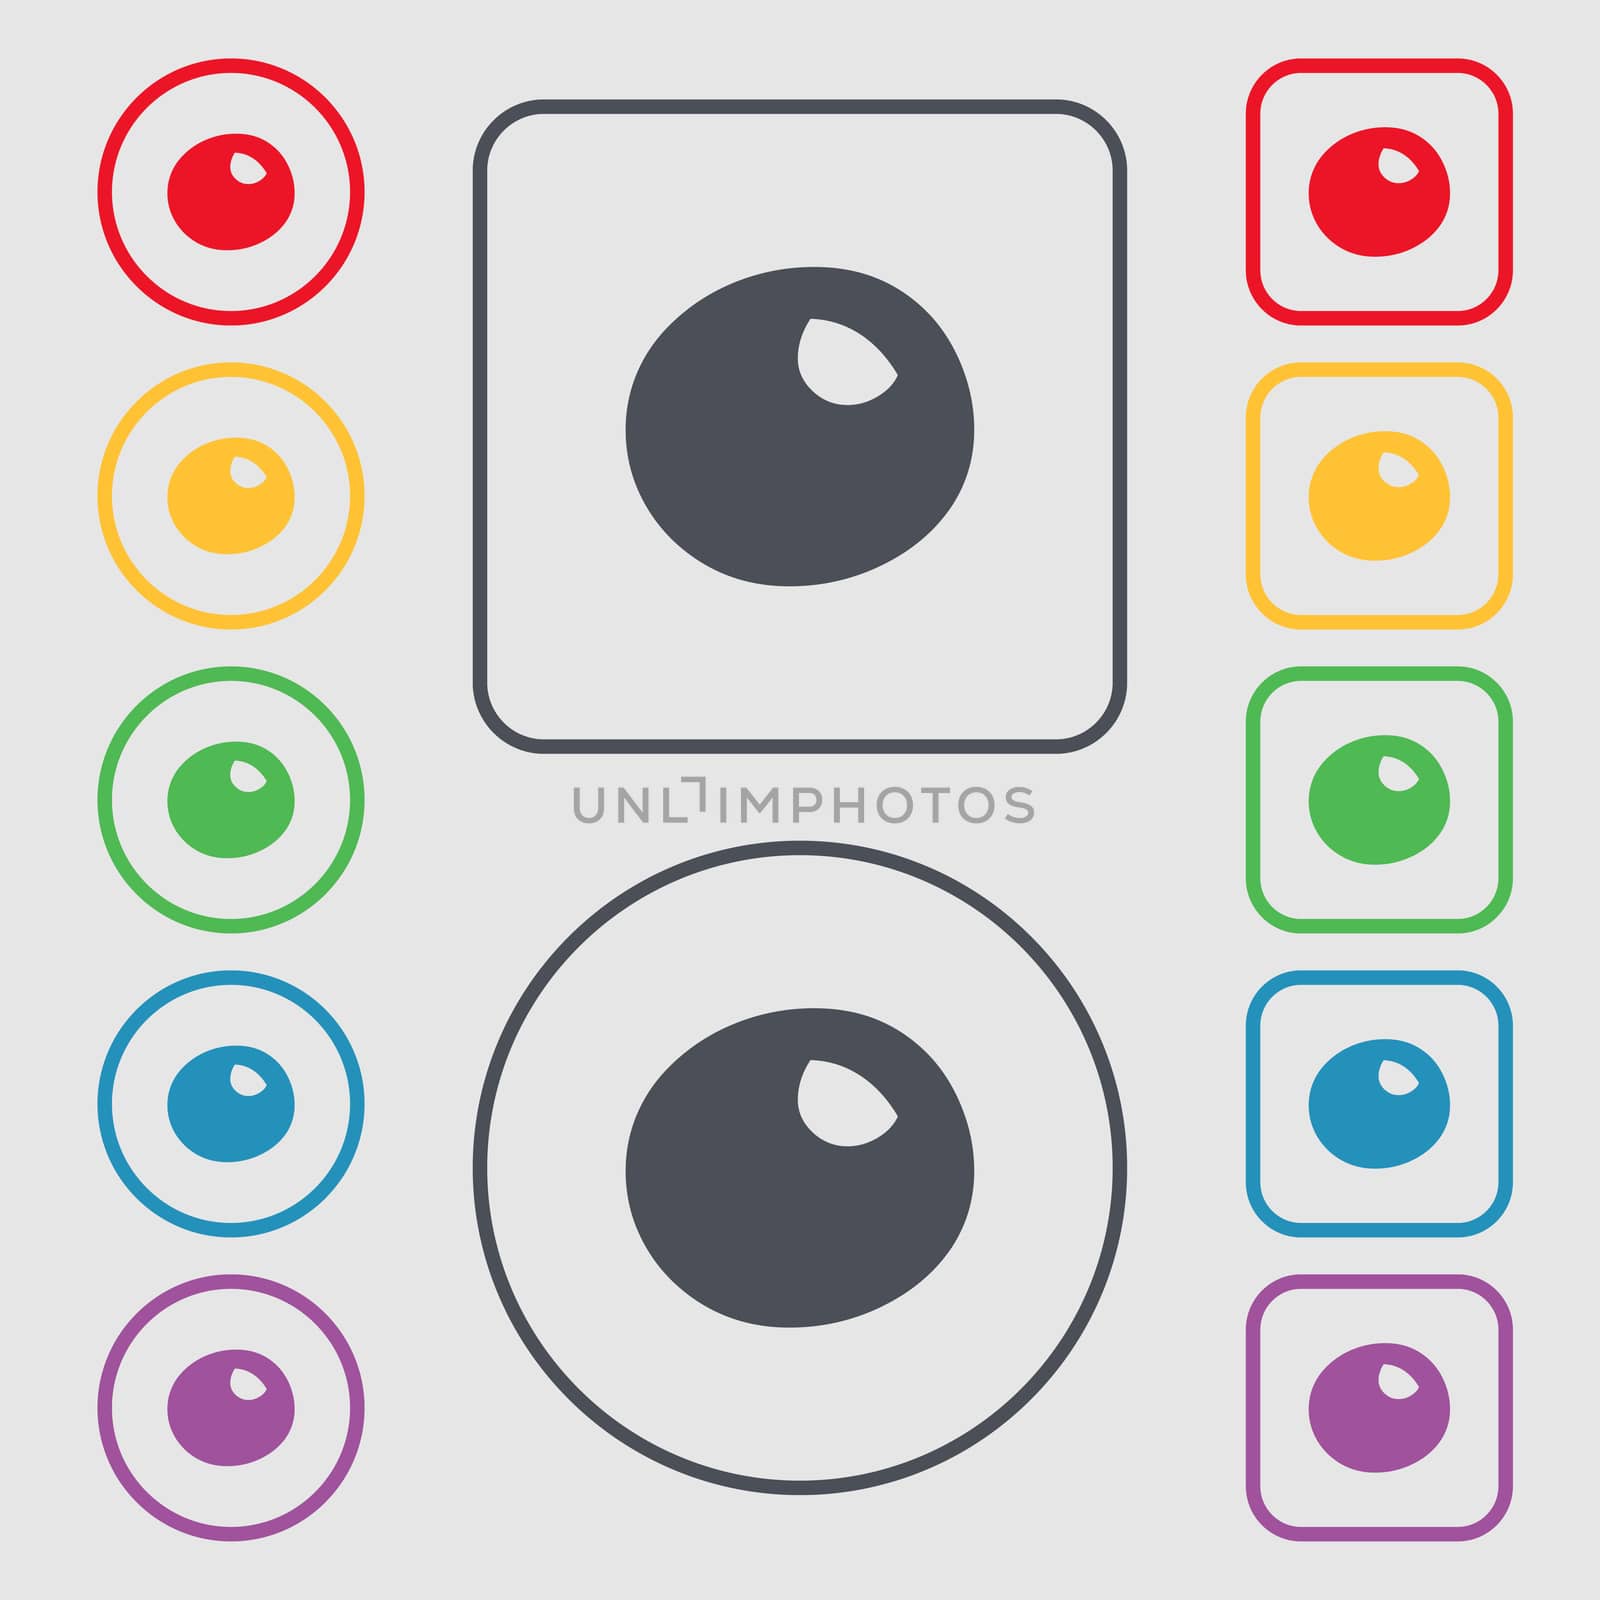 number zero icon sign. Symbols on the Round and square buttons with frame. illustration